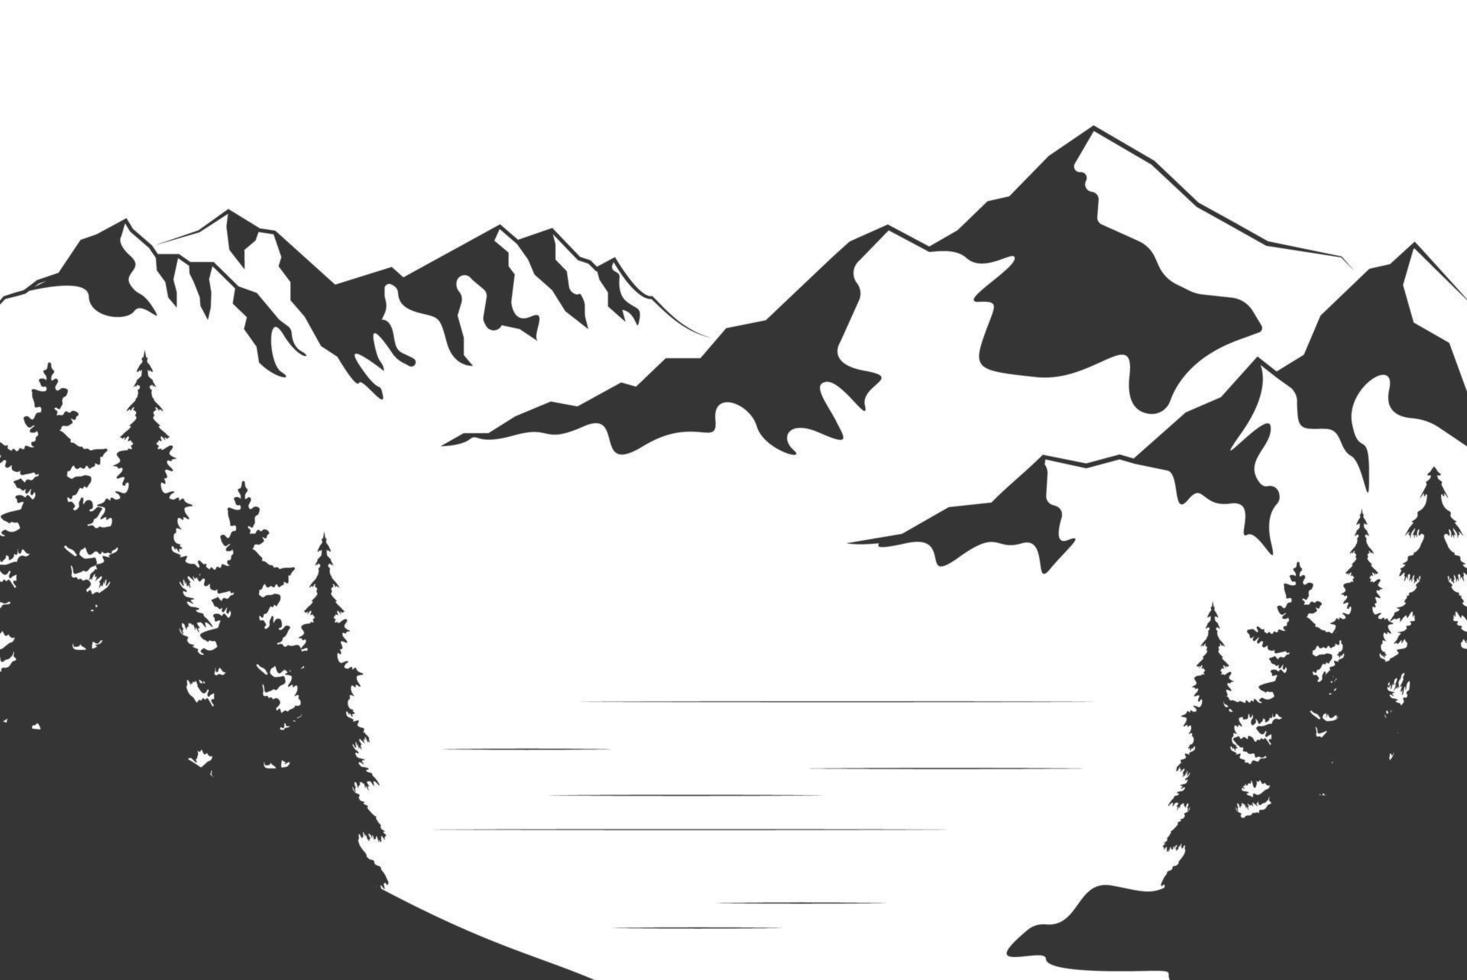 Landscape with silhouettes of mountains and Mountain river. Nature background. Vector illustration. Old style black and white mountain vector illustration